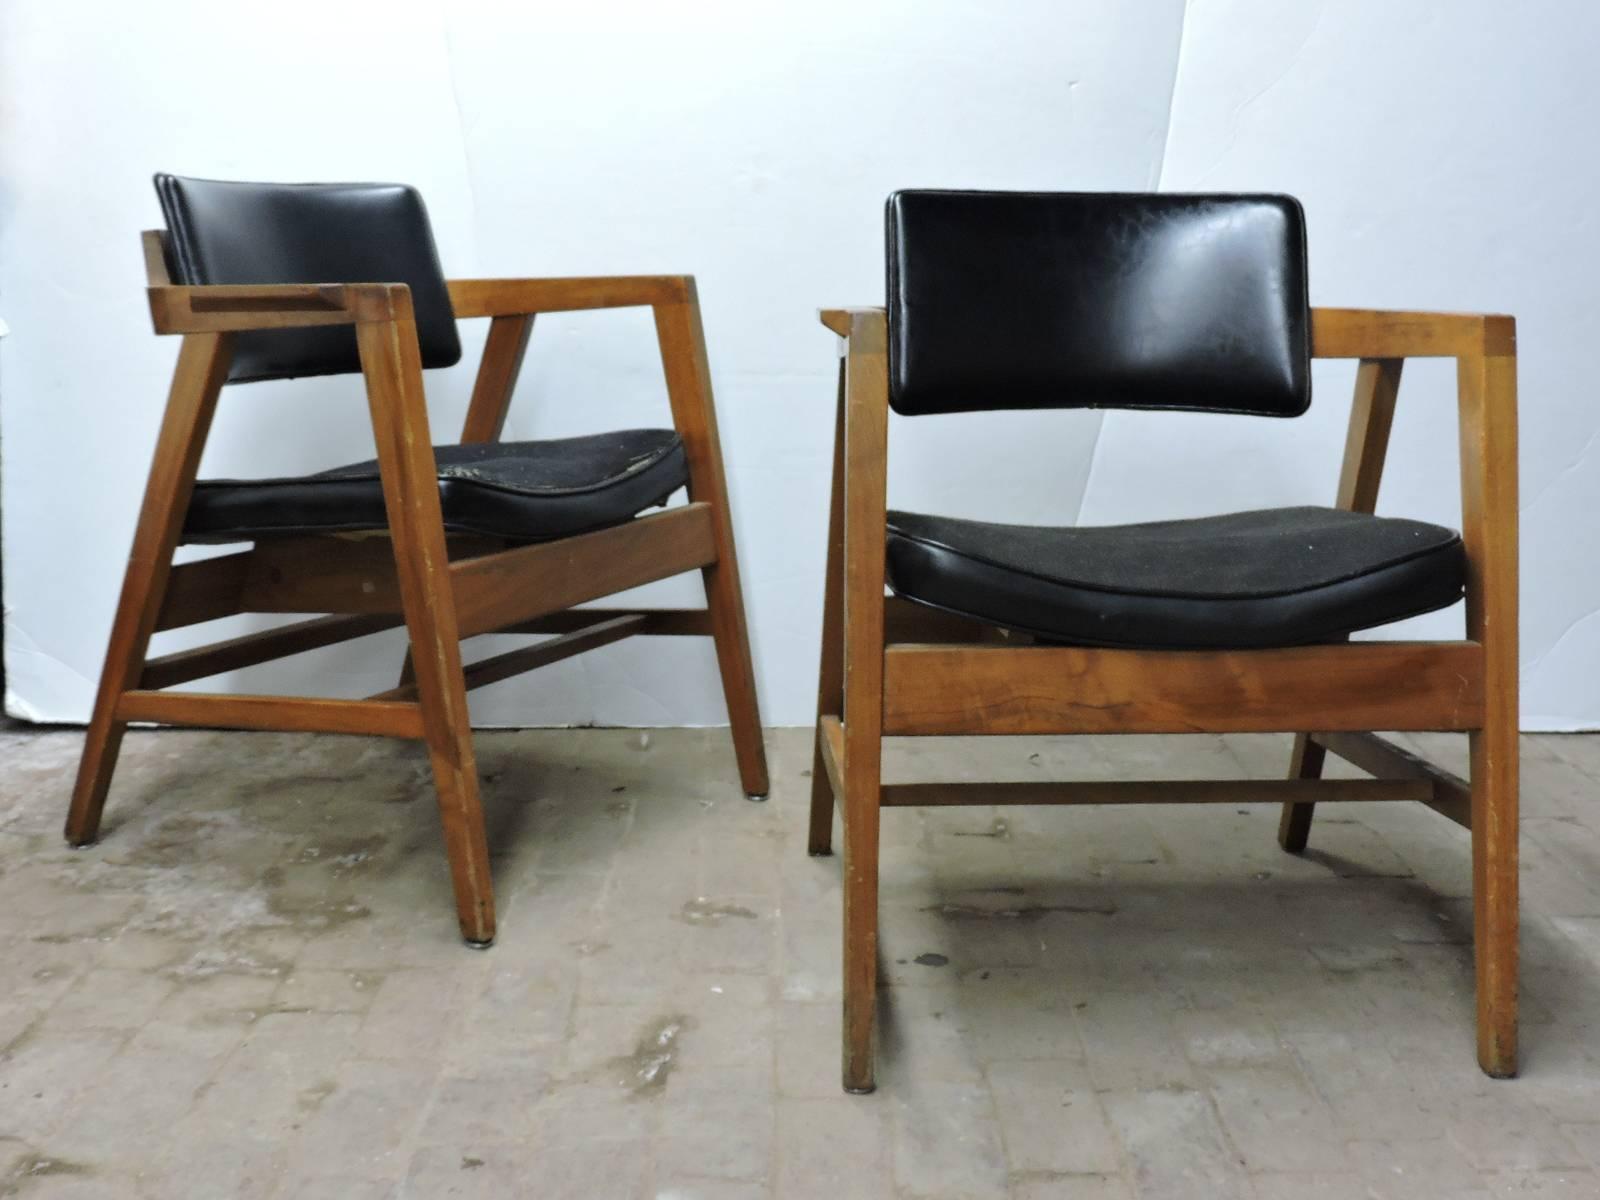 In the style of Jens Risom, a great looking pair of beautifully tapered mid 20th century American modern lounge chairs by W.H. Gunlocke Company of Wayland, NY